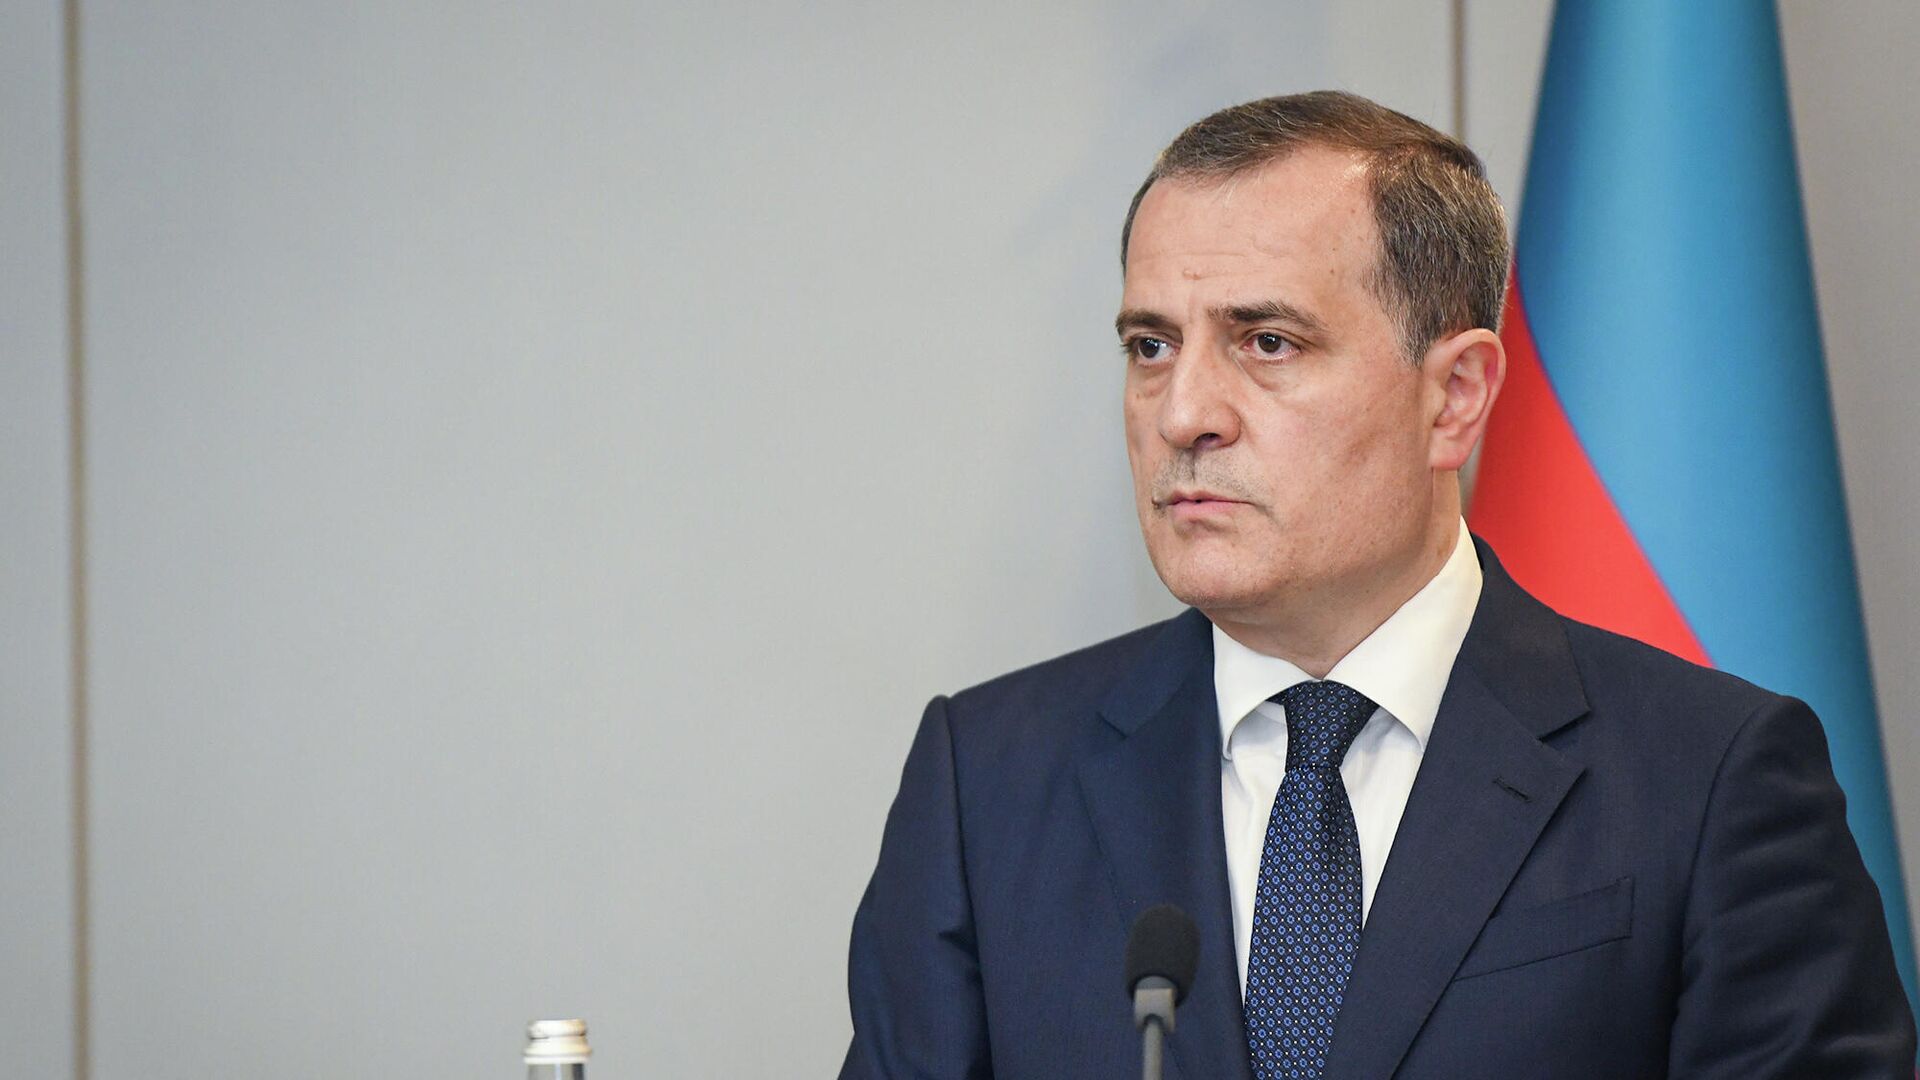 Azerbaijani Foreign Minister embarks on working visit to North Macedonia